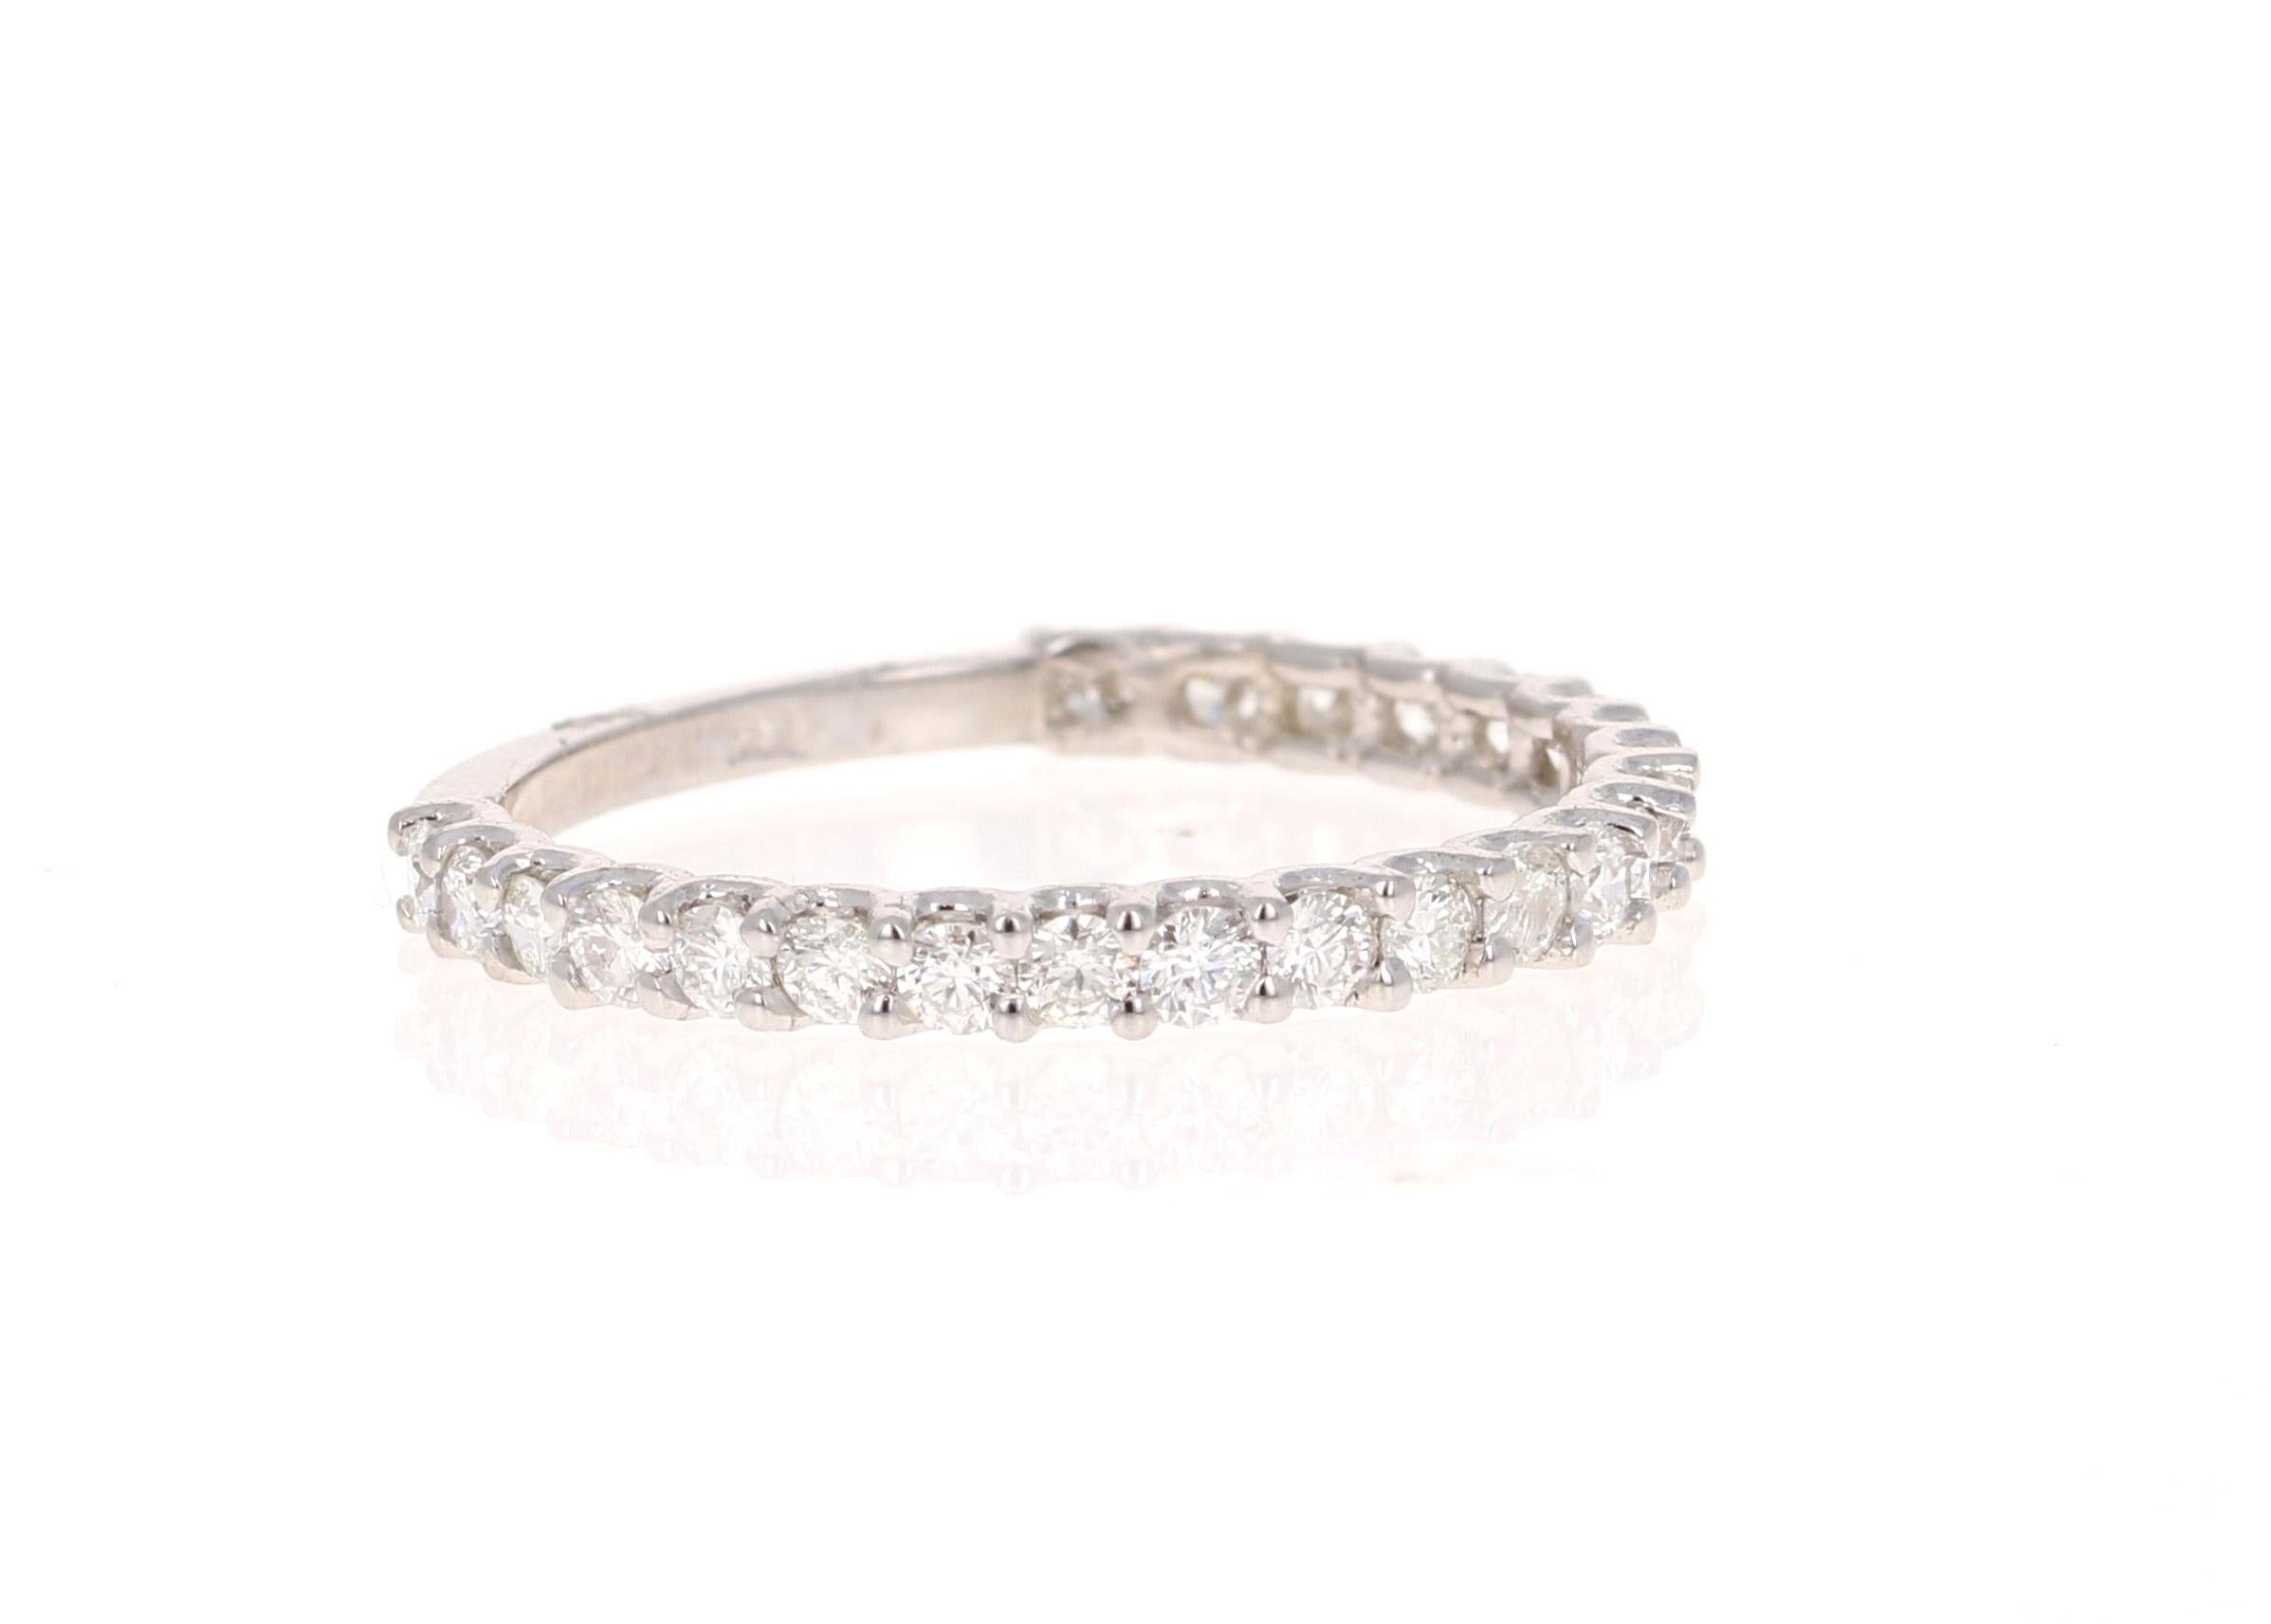 Cute and dainty 0.64 Carat Diamond band that is sure to be a great addition to anyone's accessory collection.   There are 23 Round Cut Diamonds that weigh 0.64 carats. The band is made in 14K White Gold and weighs approximately 1.4 grams.
These